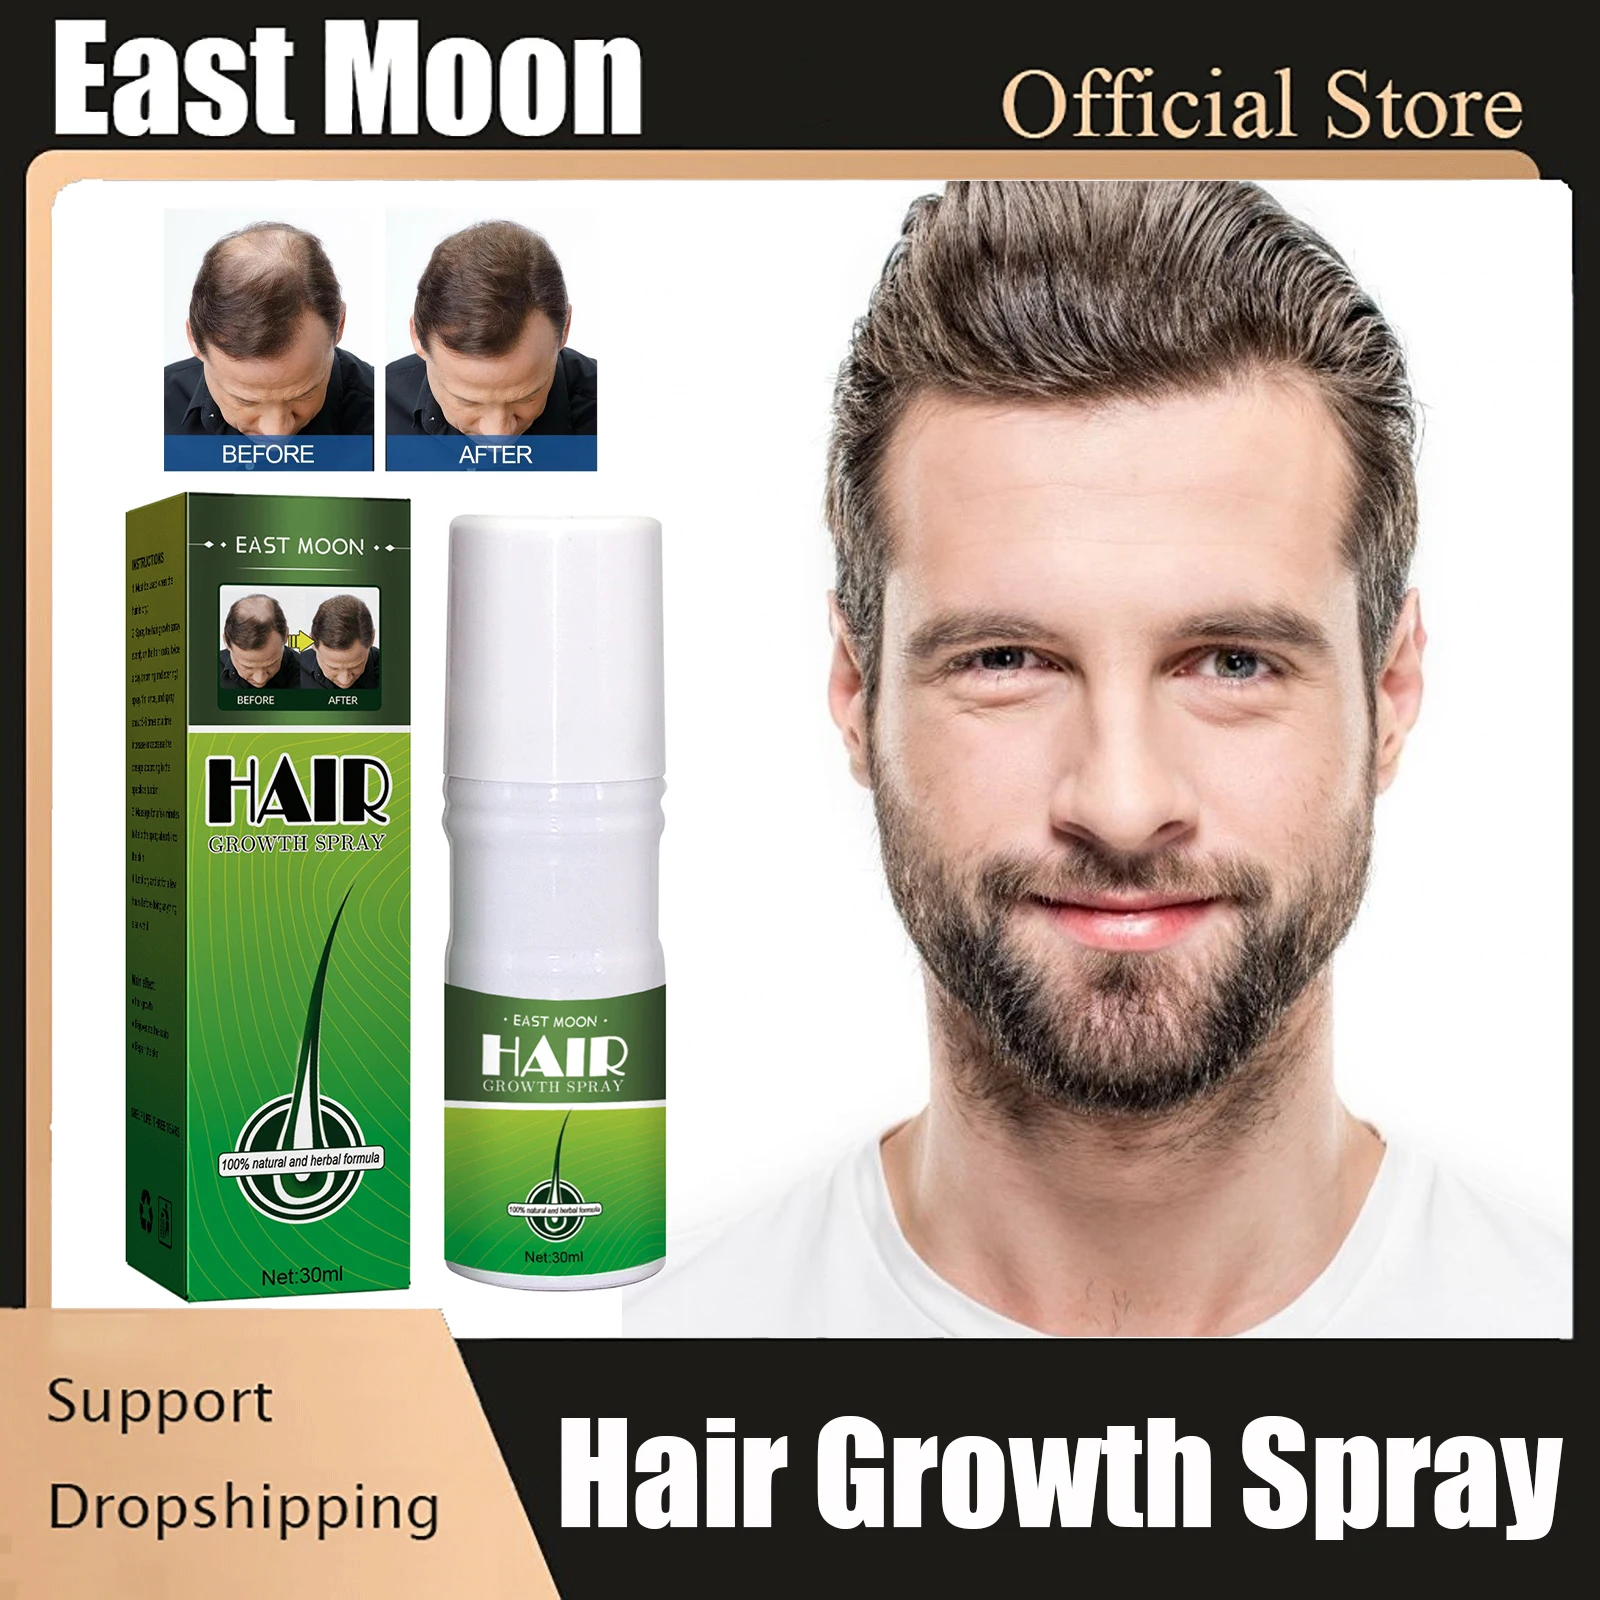 

Hair Growth Spray Herbal Anti Hair Loss Treatment Repair Nourish Hair Roots Protect Scalp Promote Regrowth Thicker For Men Women